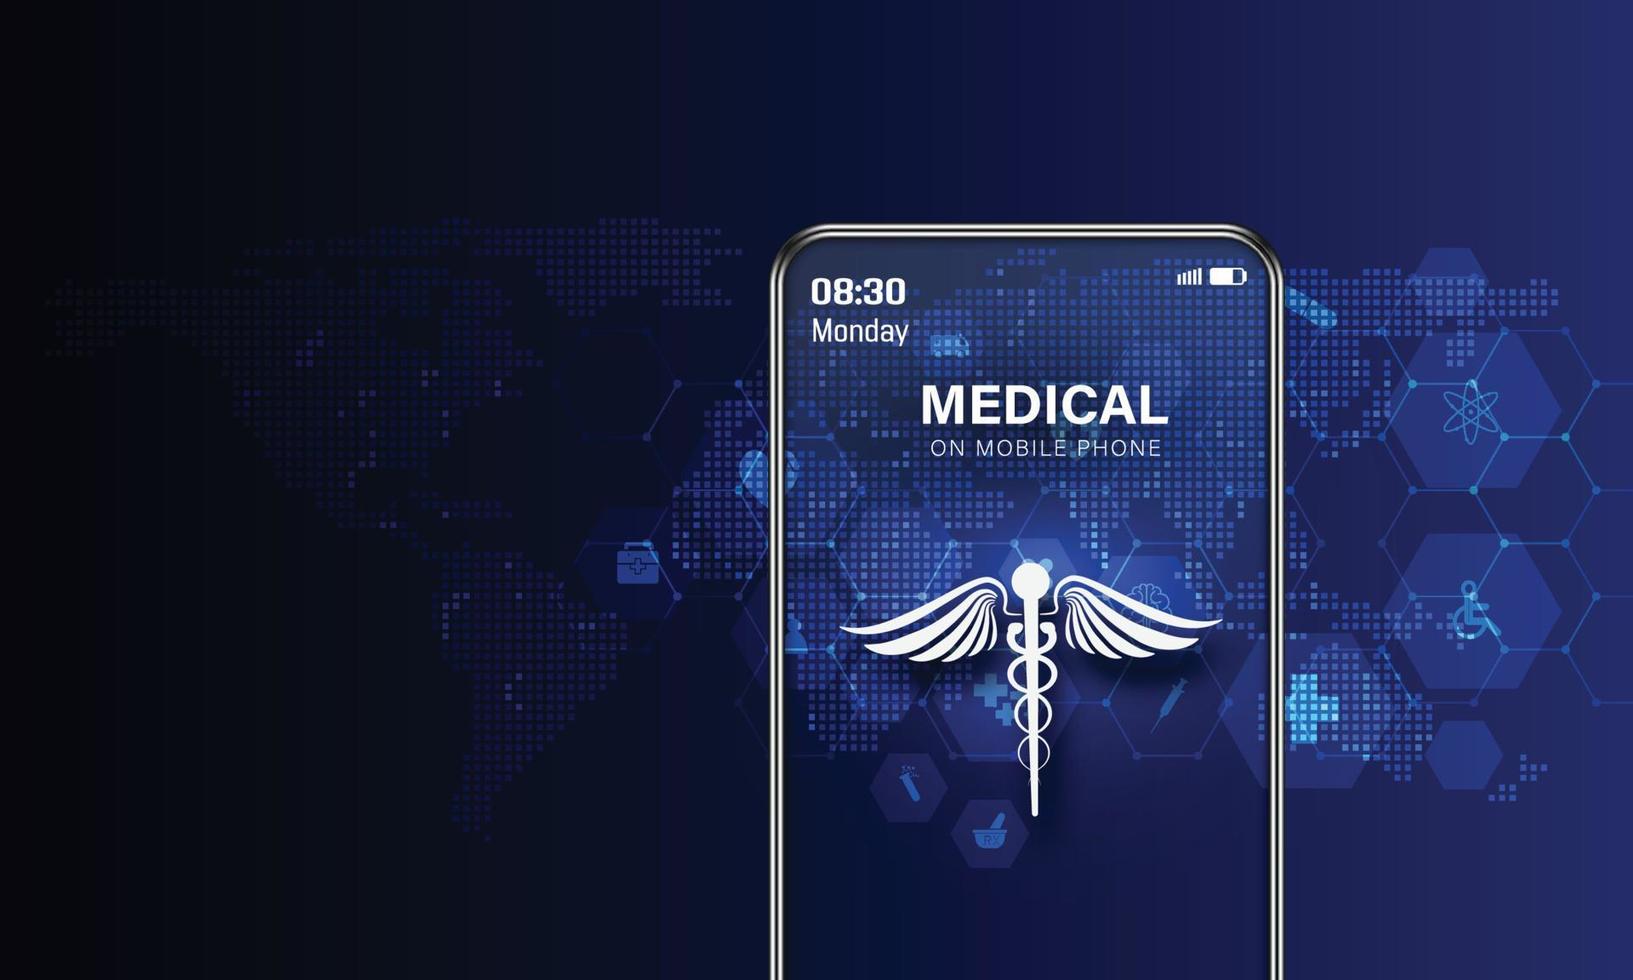 Doctor online. Medical technology. Telemedicine. Medicine consultation with physician in internet clinic. Online medical clinic communication with patient through mobile phone. Health care future. vector